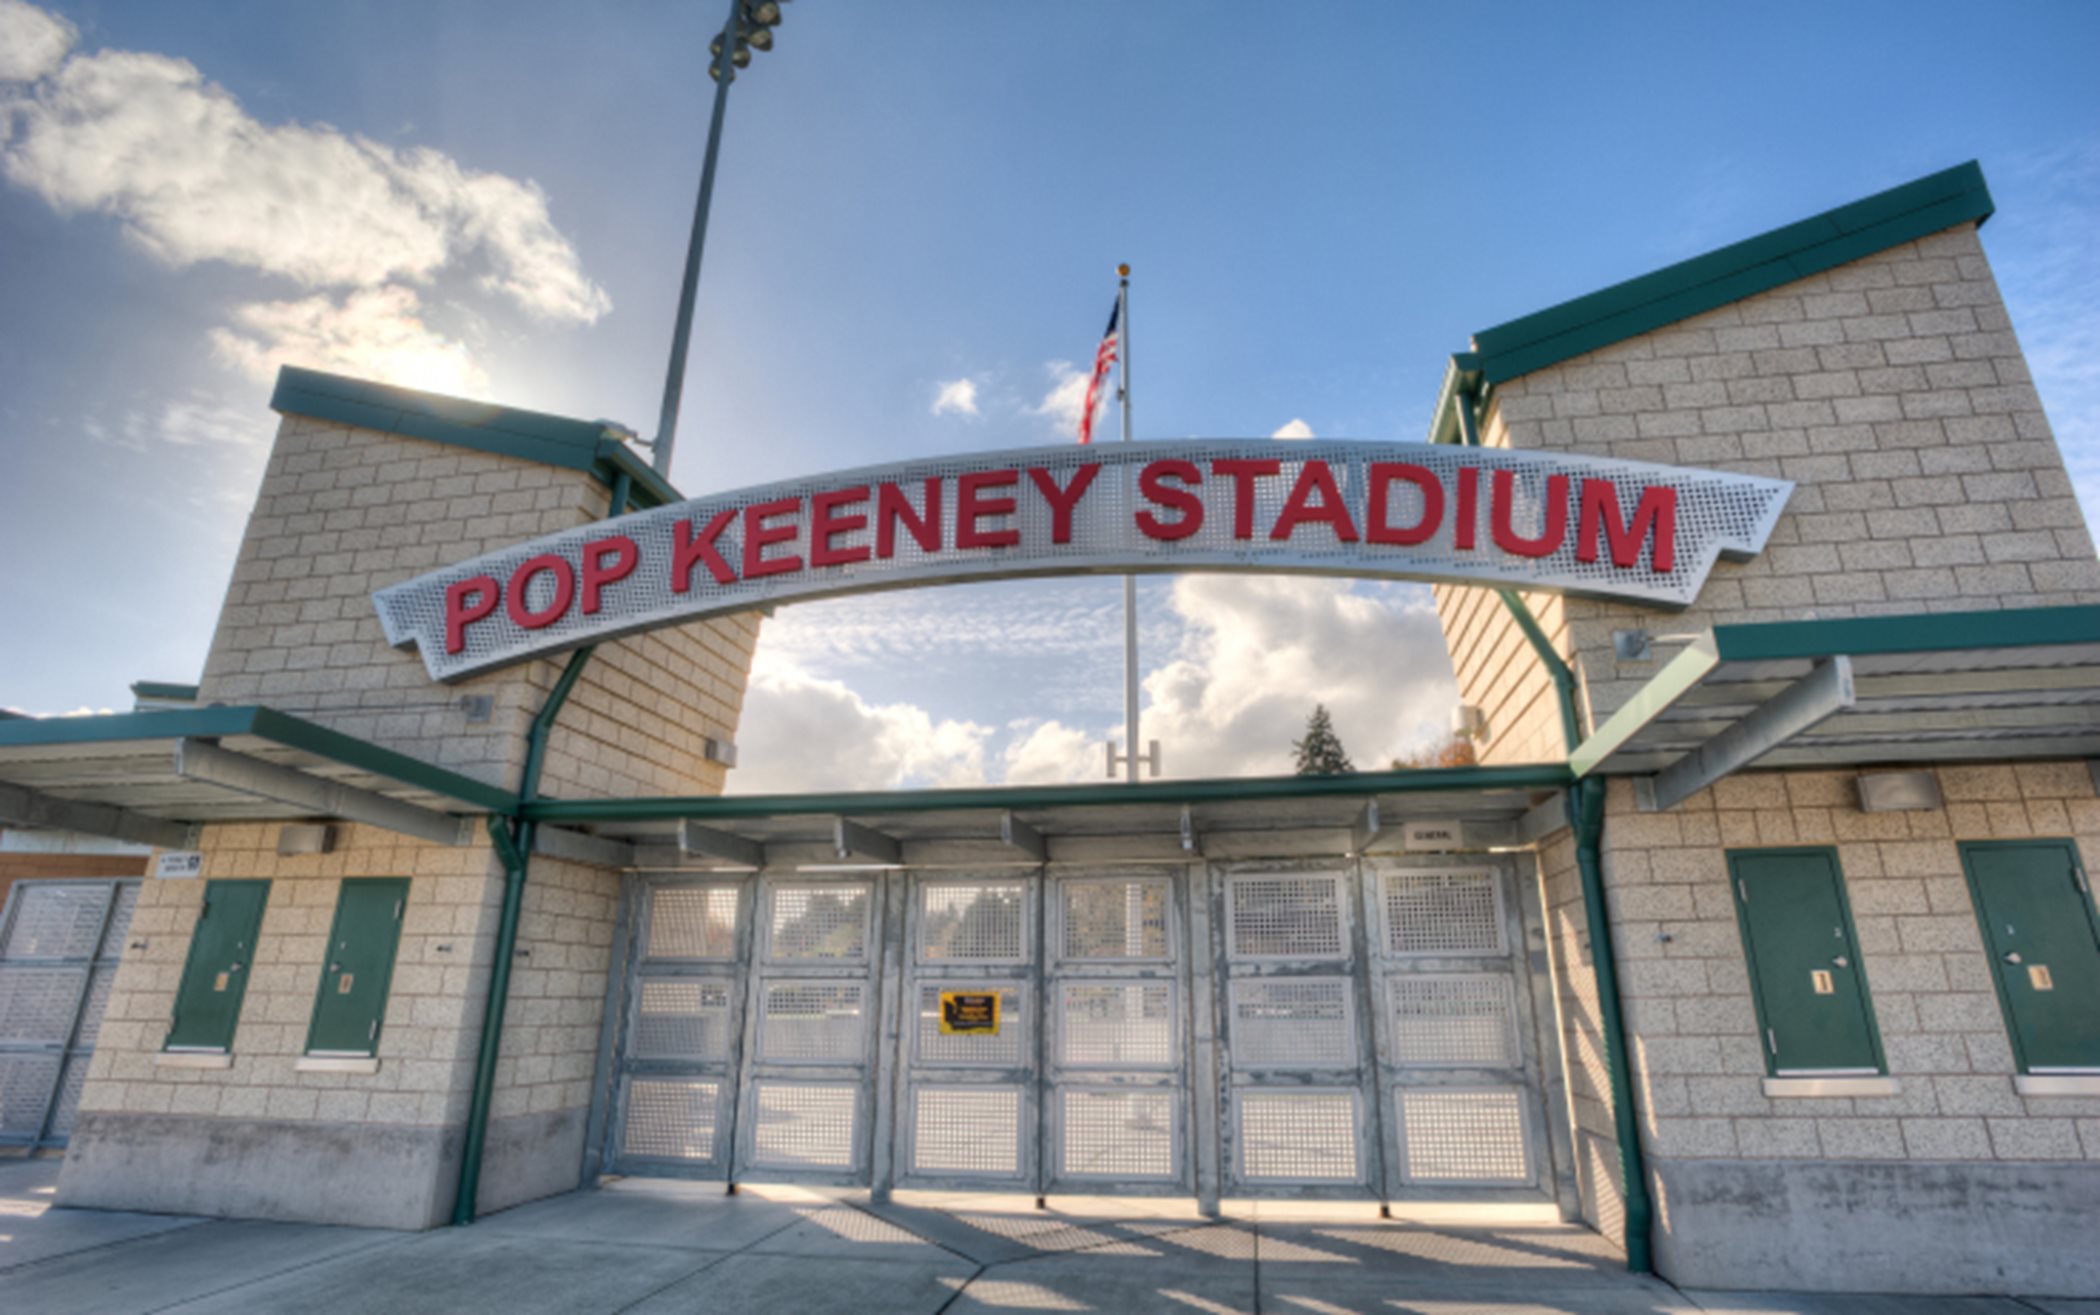 A stadium with the pop keeney sign held by two towers/ticket booths made of tan brick with green accents